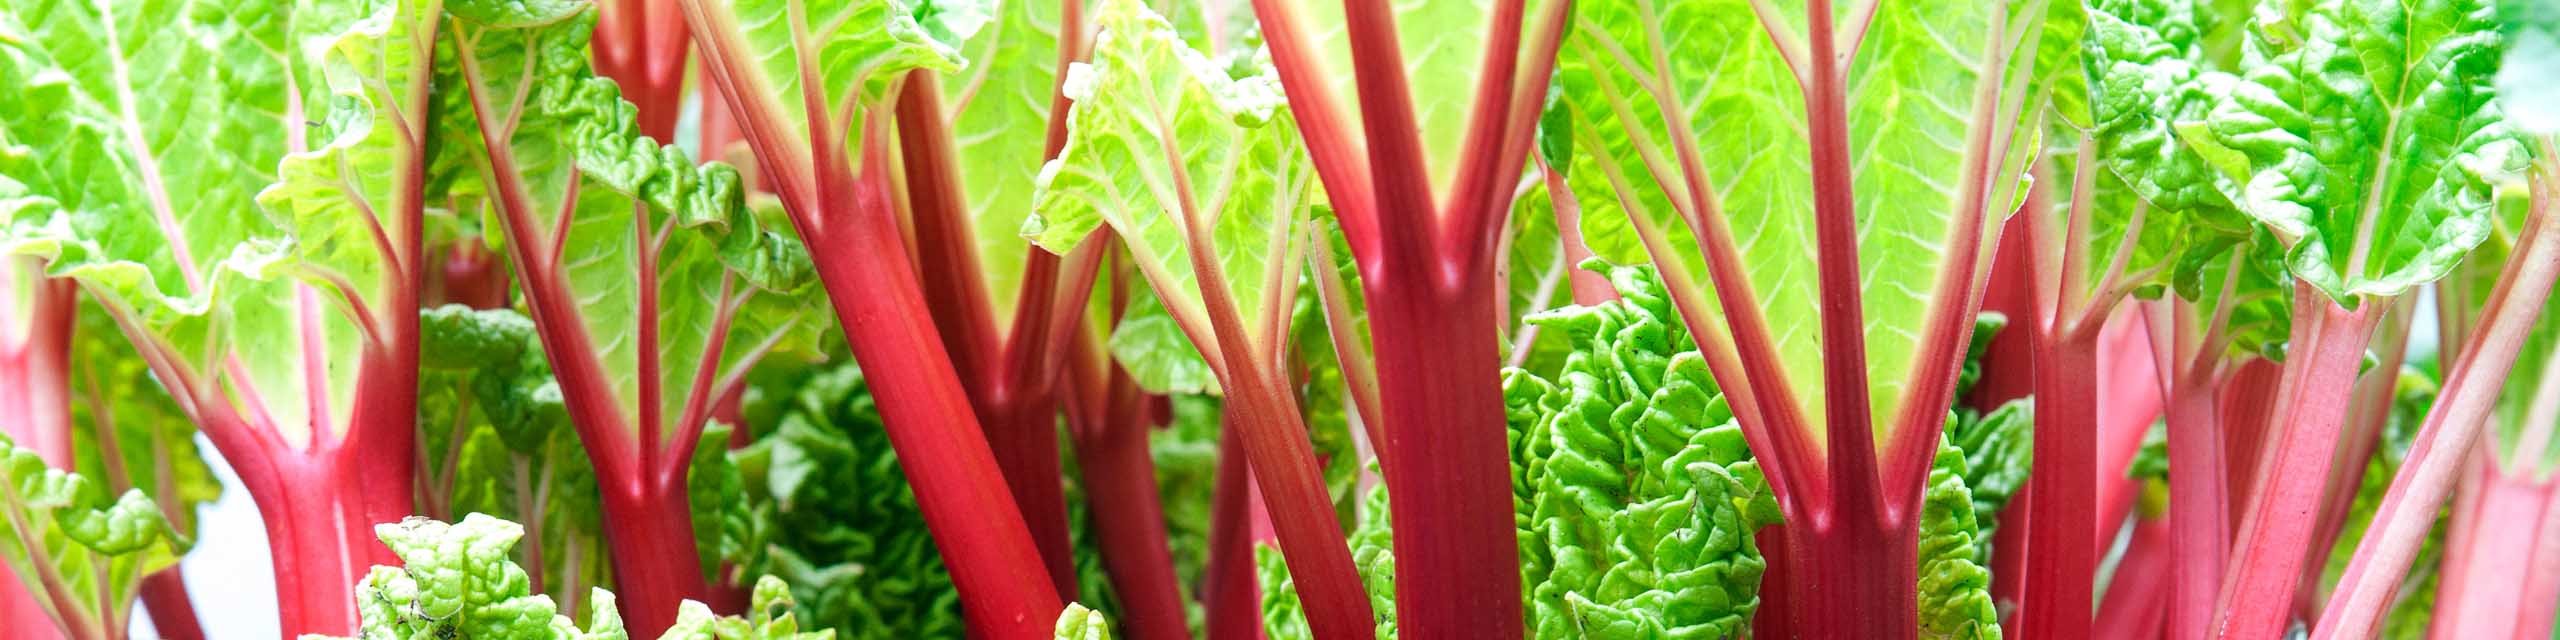 Close up of rhubarb plants with red stems and green leaves.